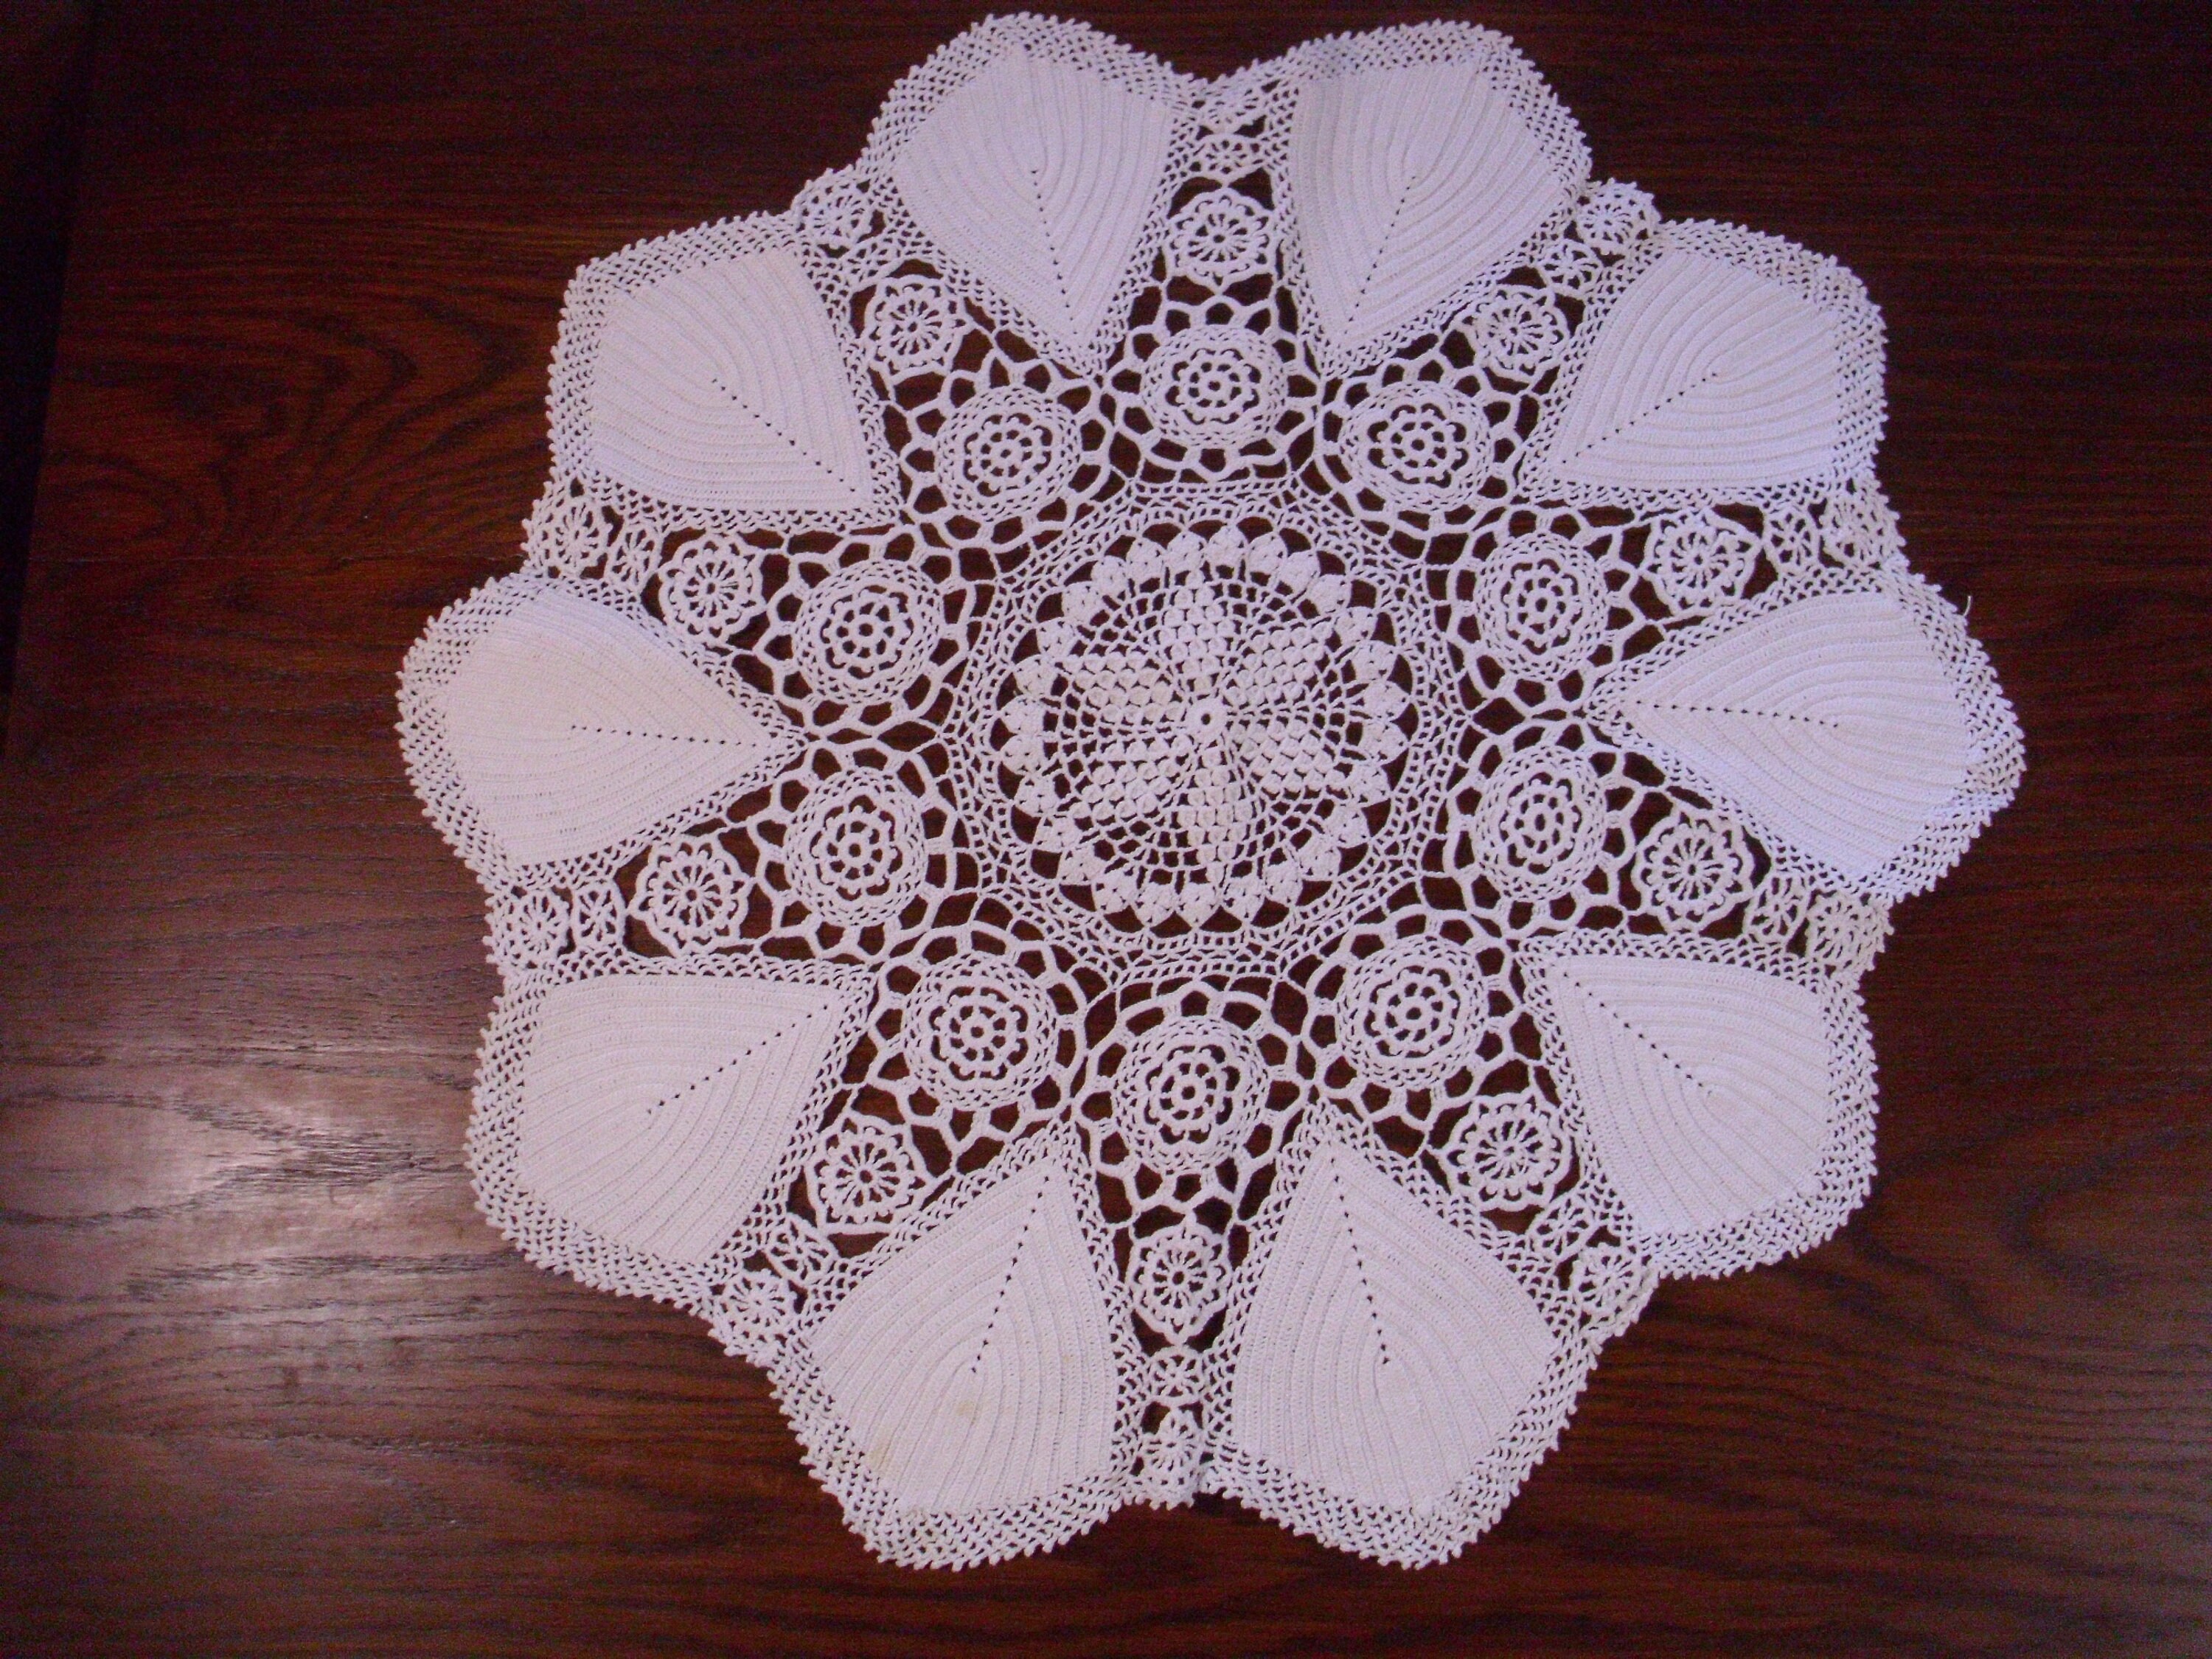 White Vintage Crochet Doily Round Cotton Handmade Table Cloth Mats Lace 23" 